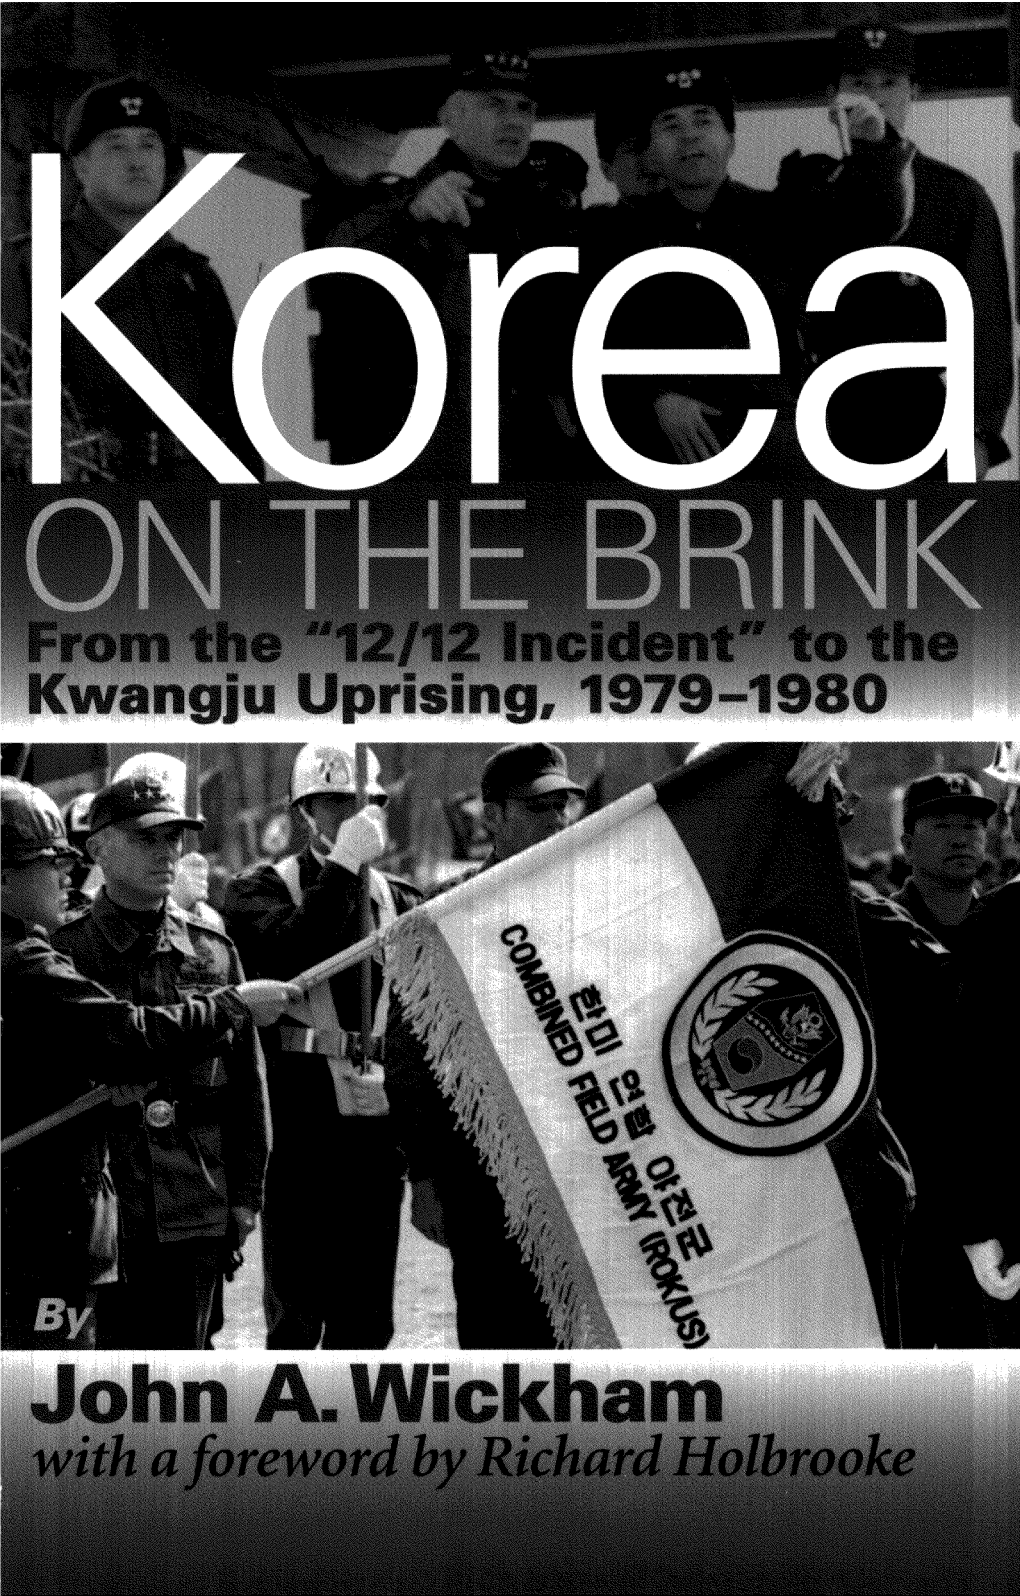 Korea on the BRINK on the BRINK from the "12/12 Incident" to the Kwangju Uprising, 1979-1980